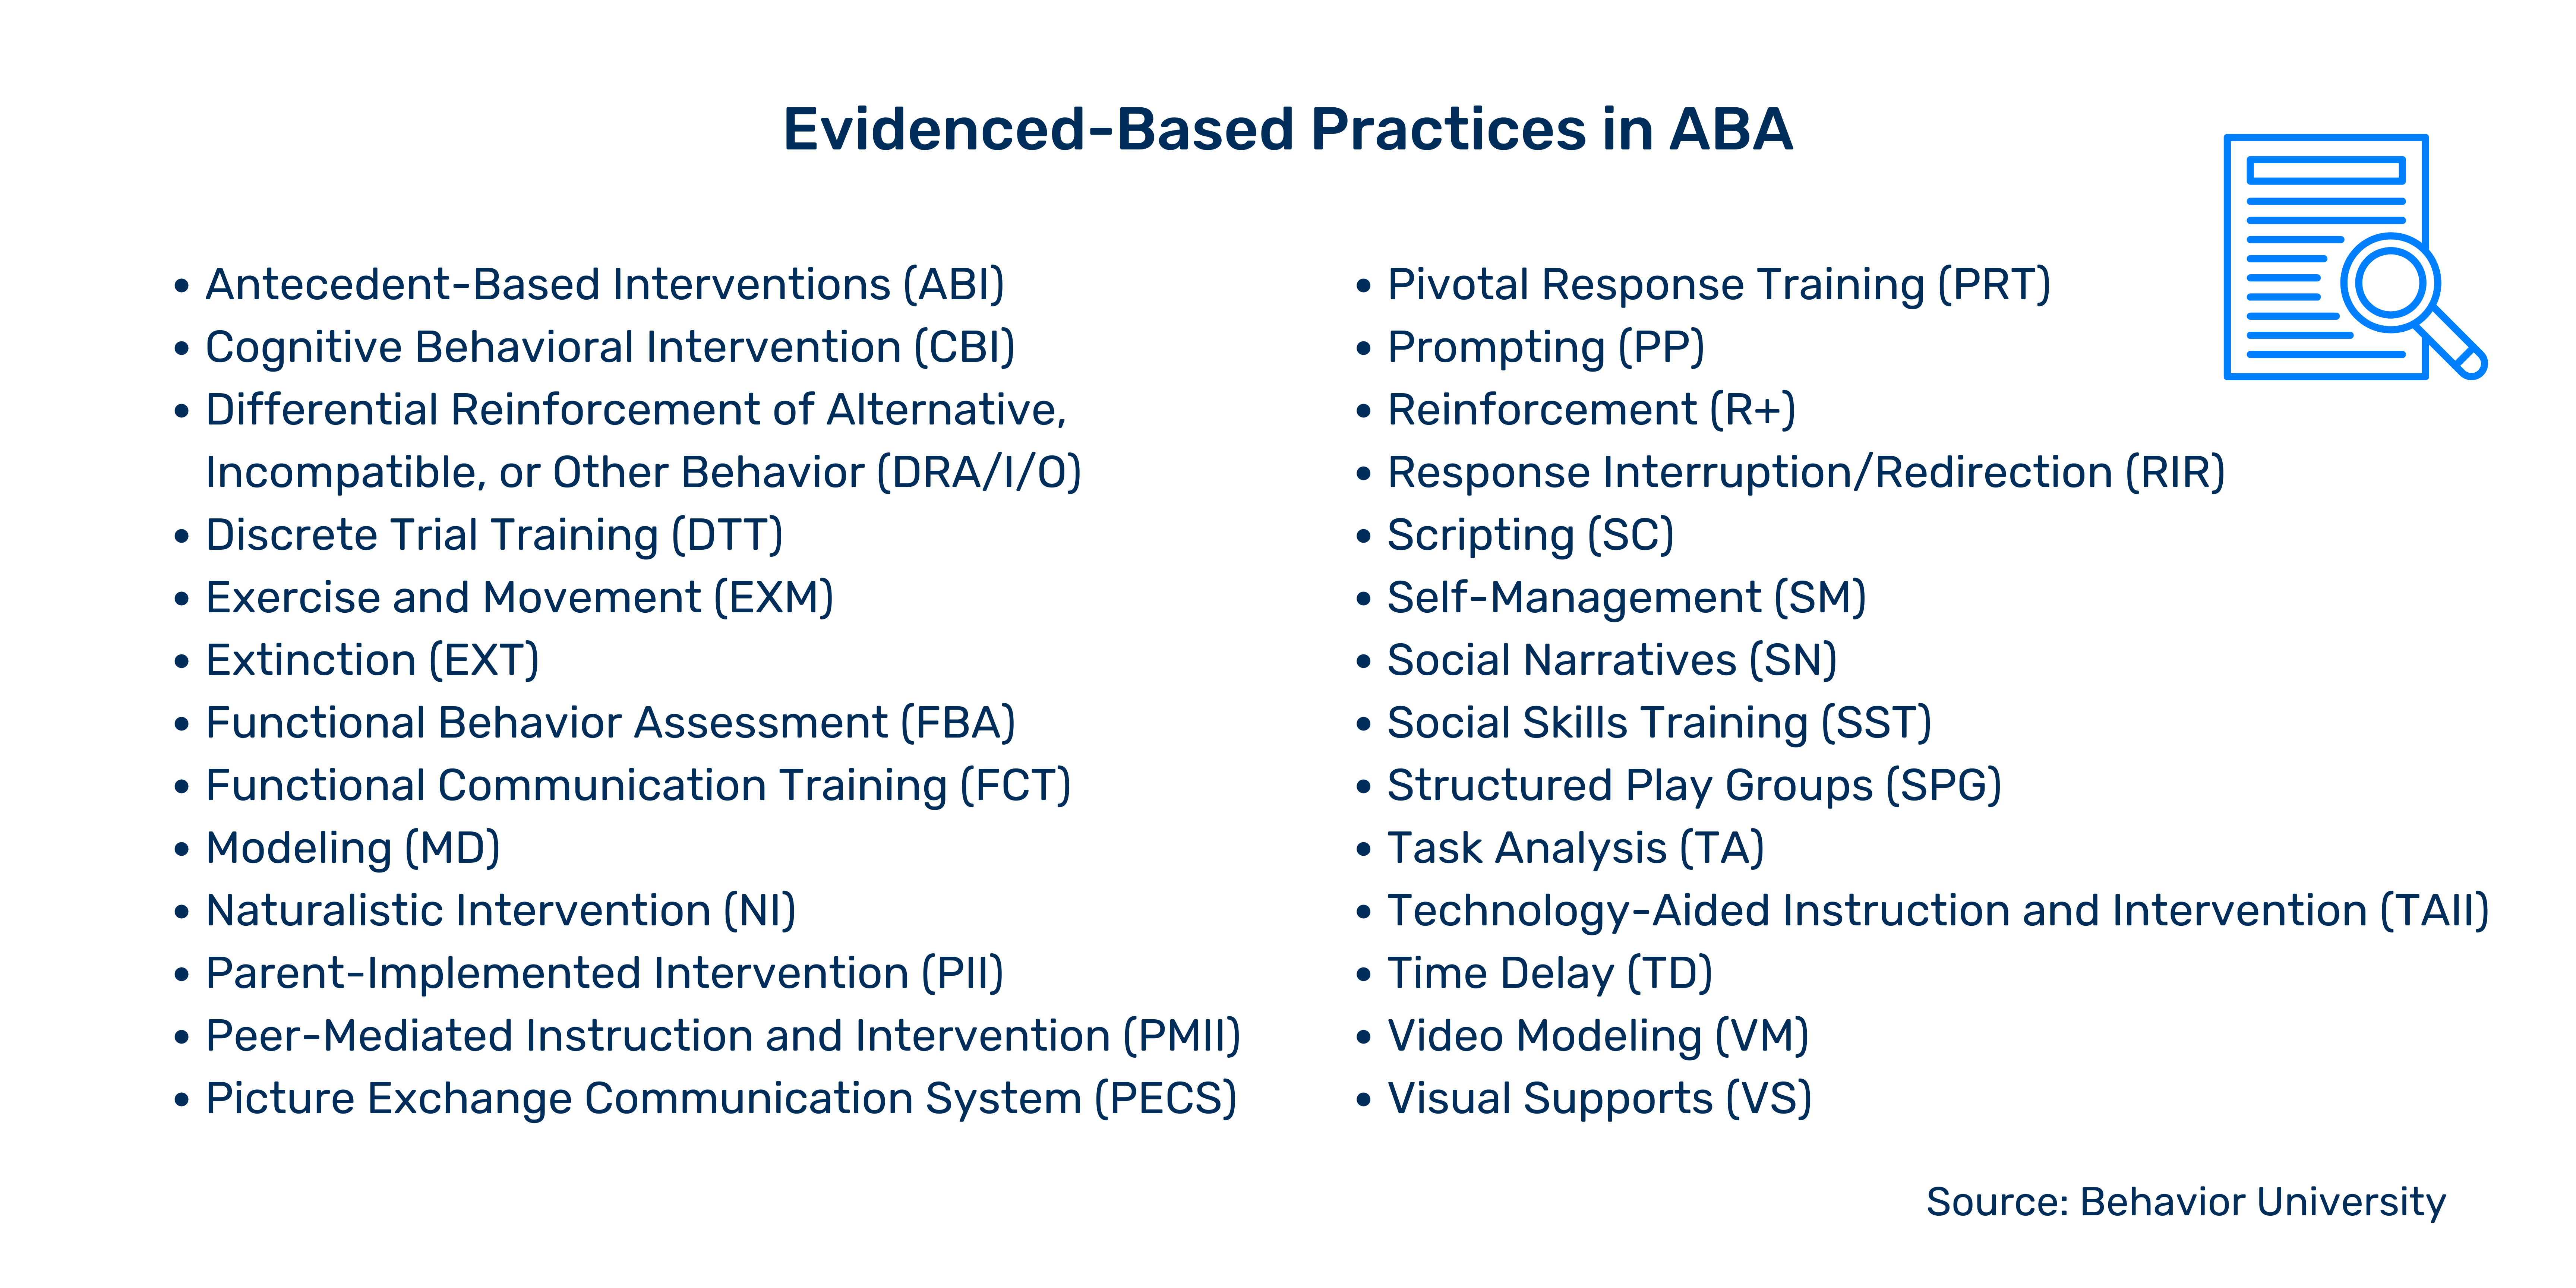 Evidenced-Based Practices in ABA